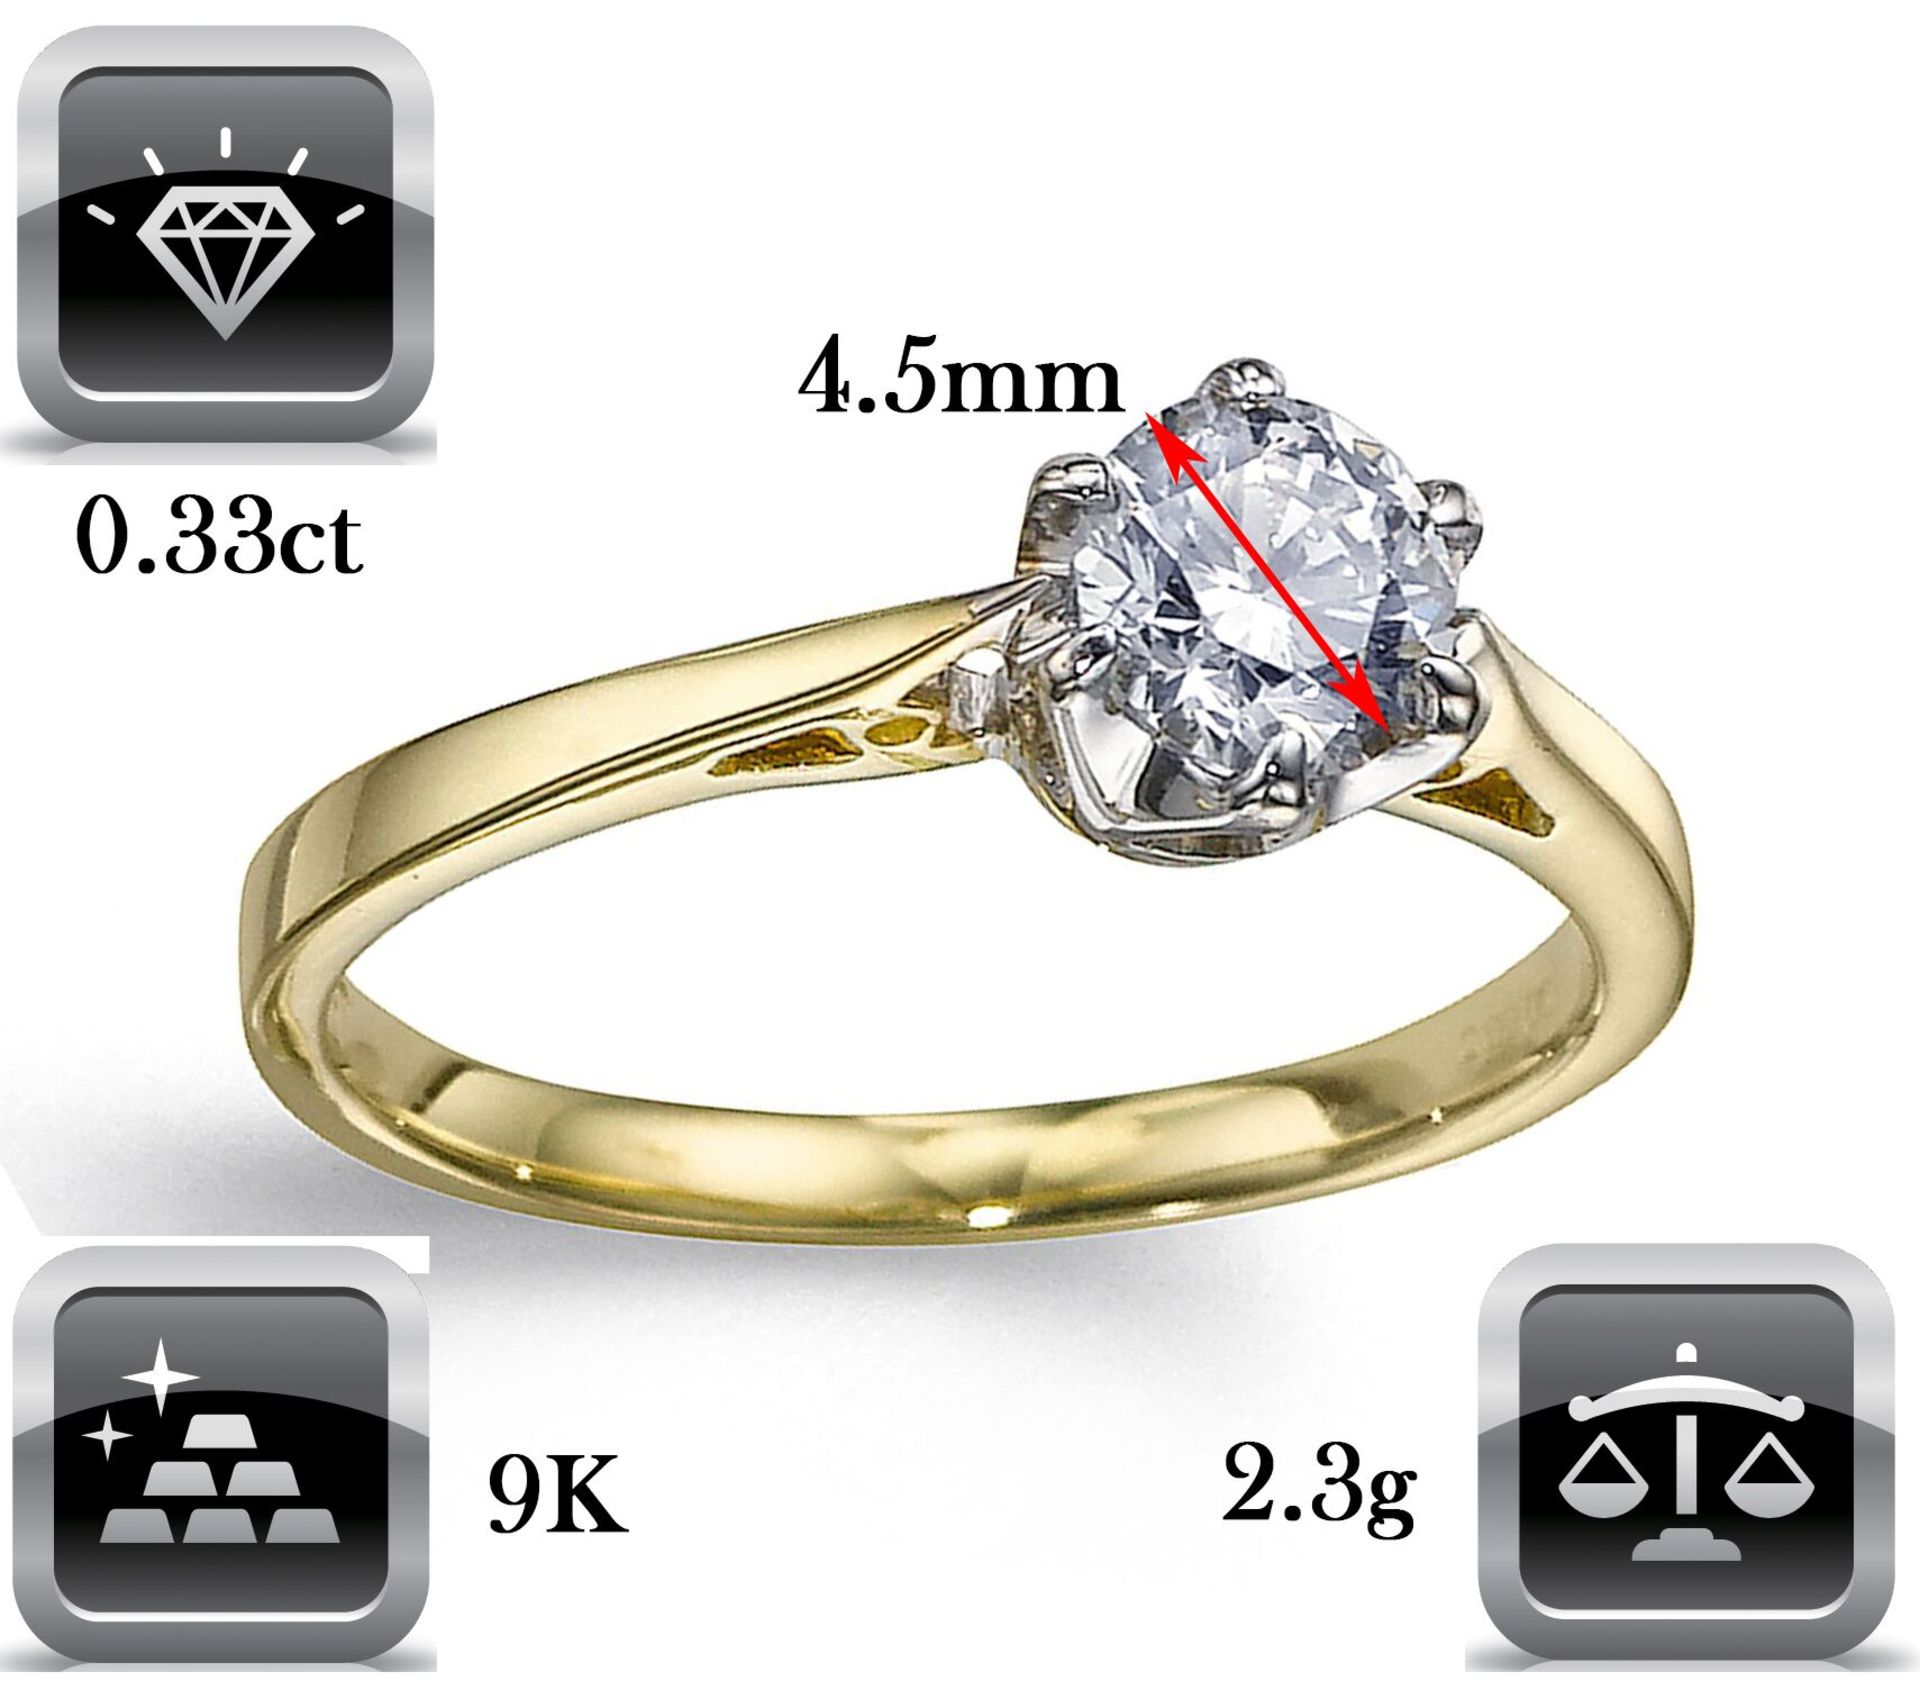 6 Claw Diamond Solitaire engagement ring - Image 2 of 3